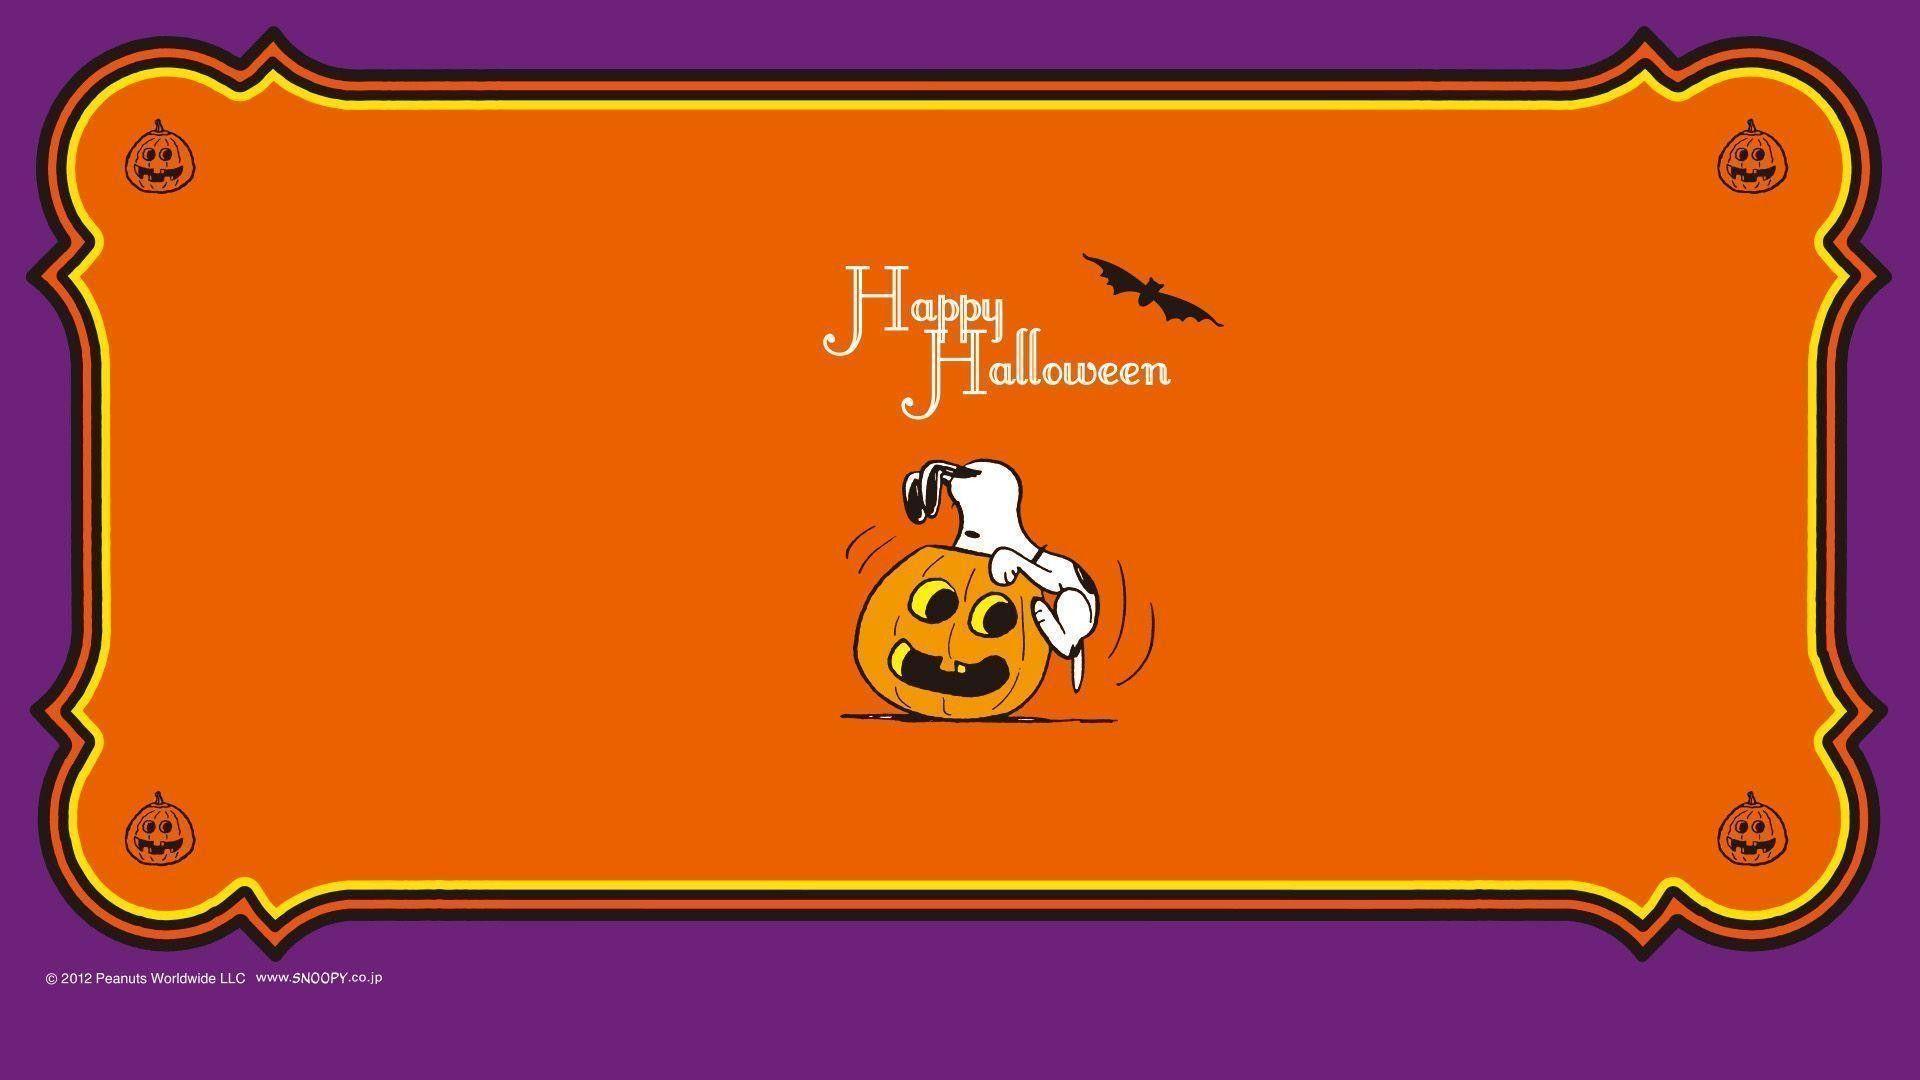 Snoopy Halloween Wallpapers Top Free Snoopy Halloween Backgrounds Wallpaperaccess